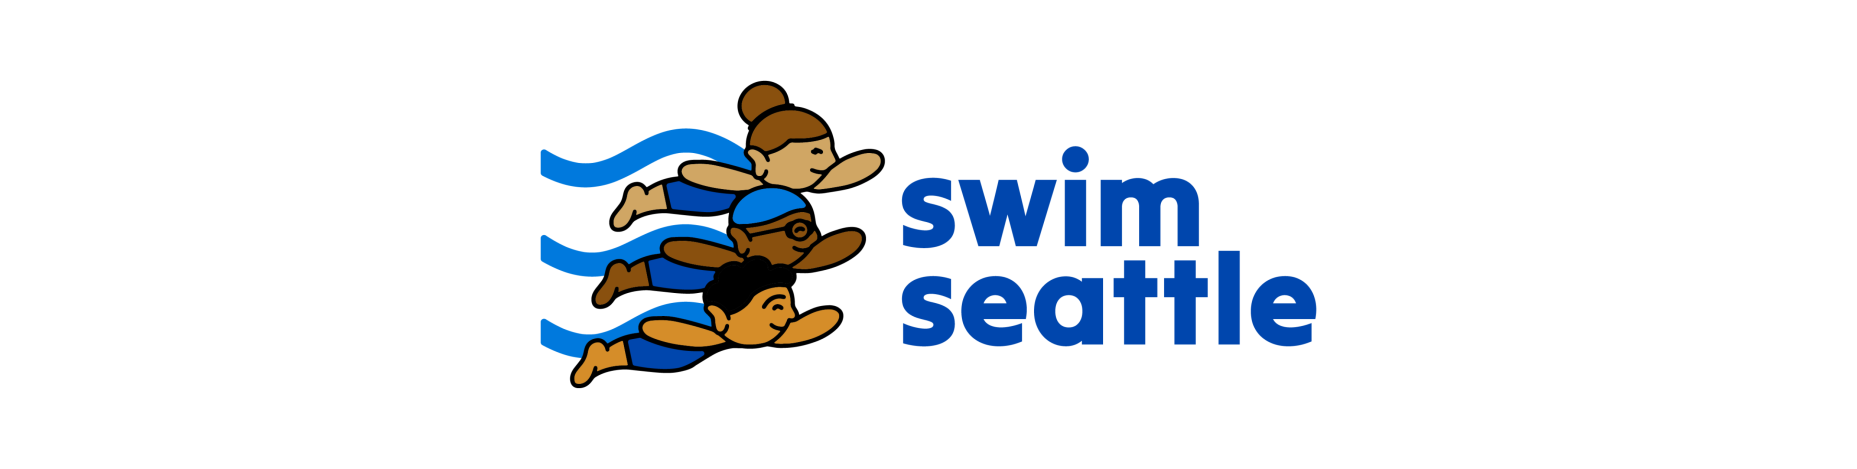 swim_seattle_donation_page_website_header-0001.png